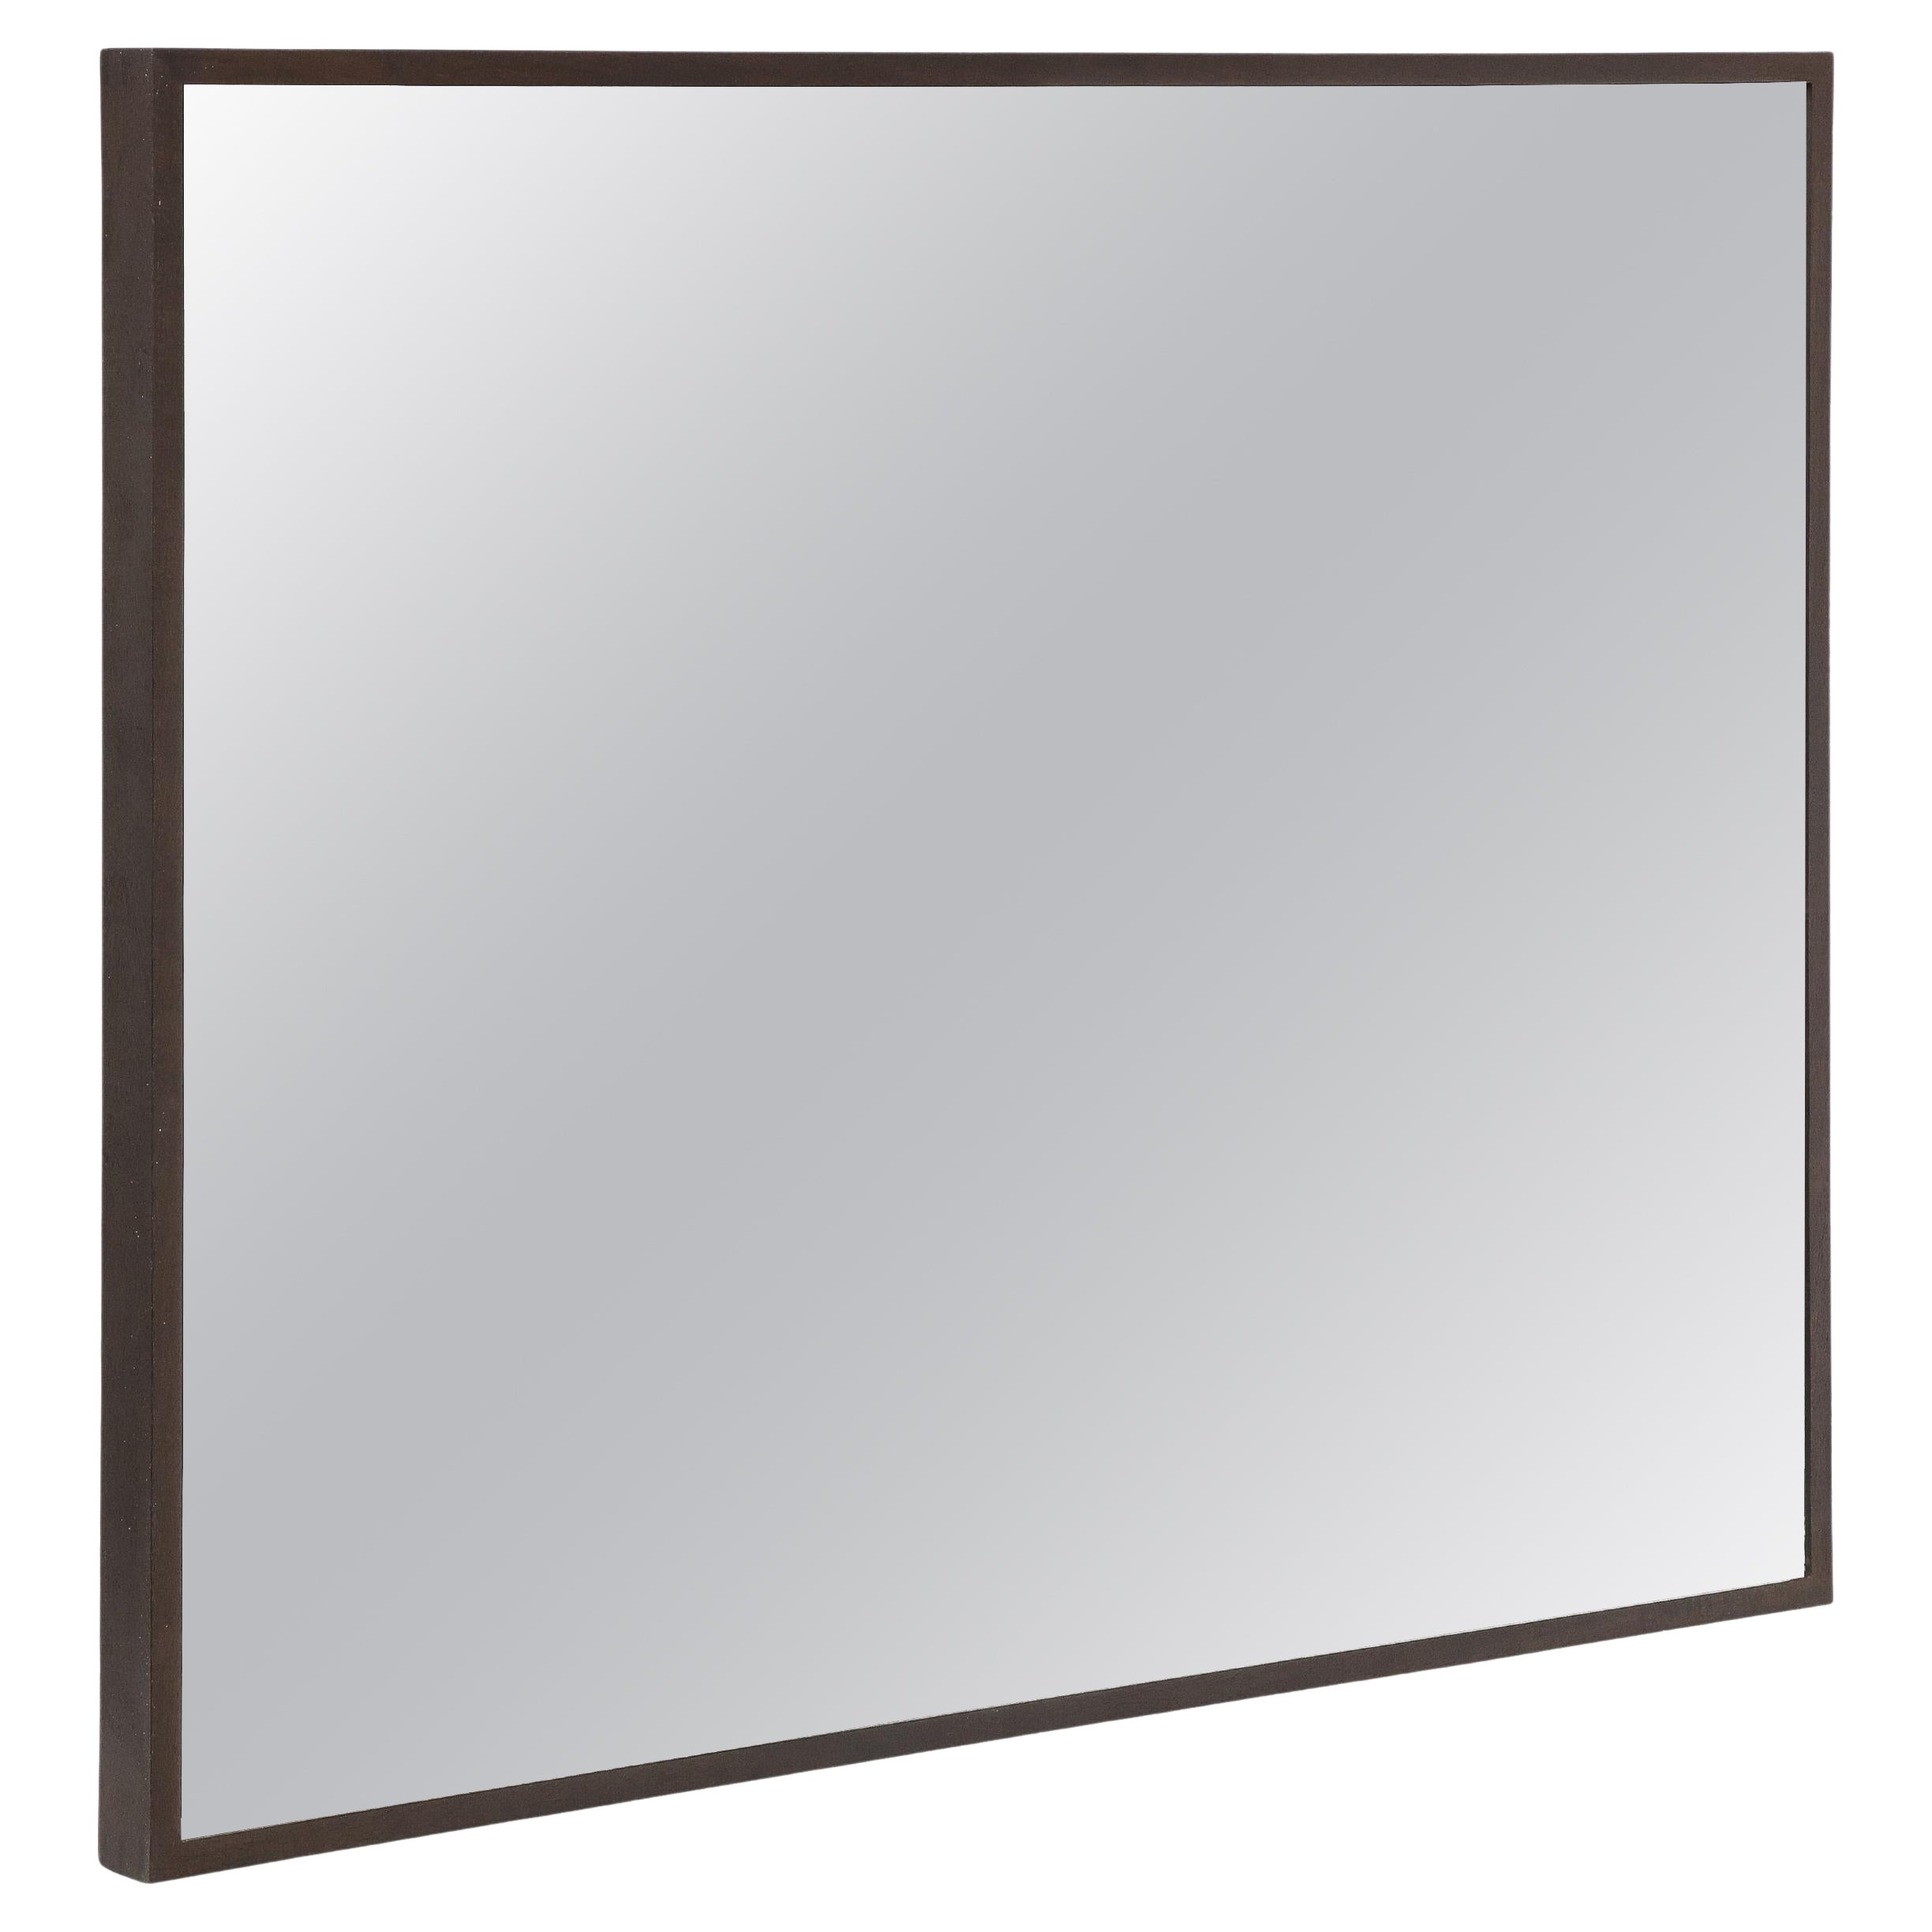 Black Stained Oak Wall Mirror, Contemporary